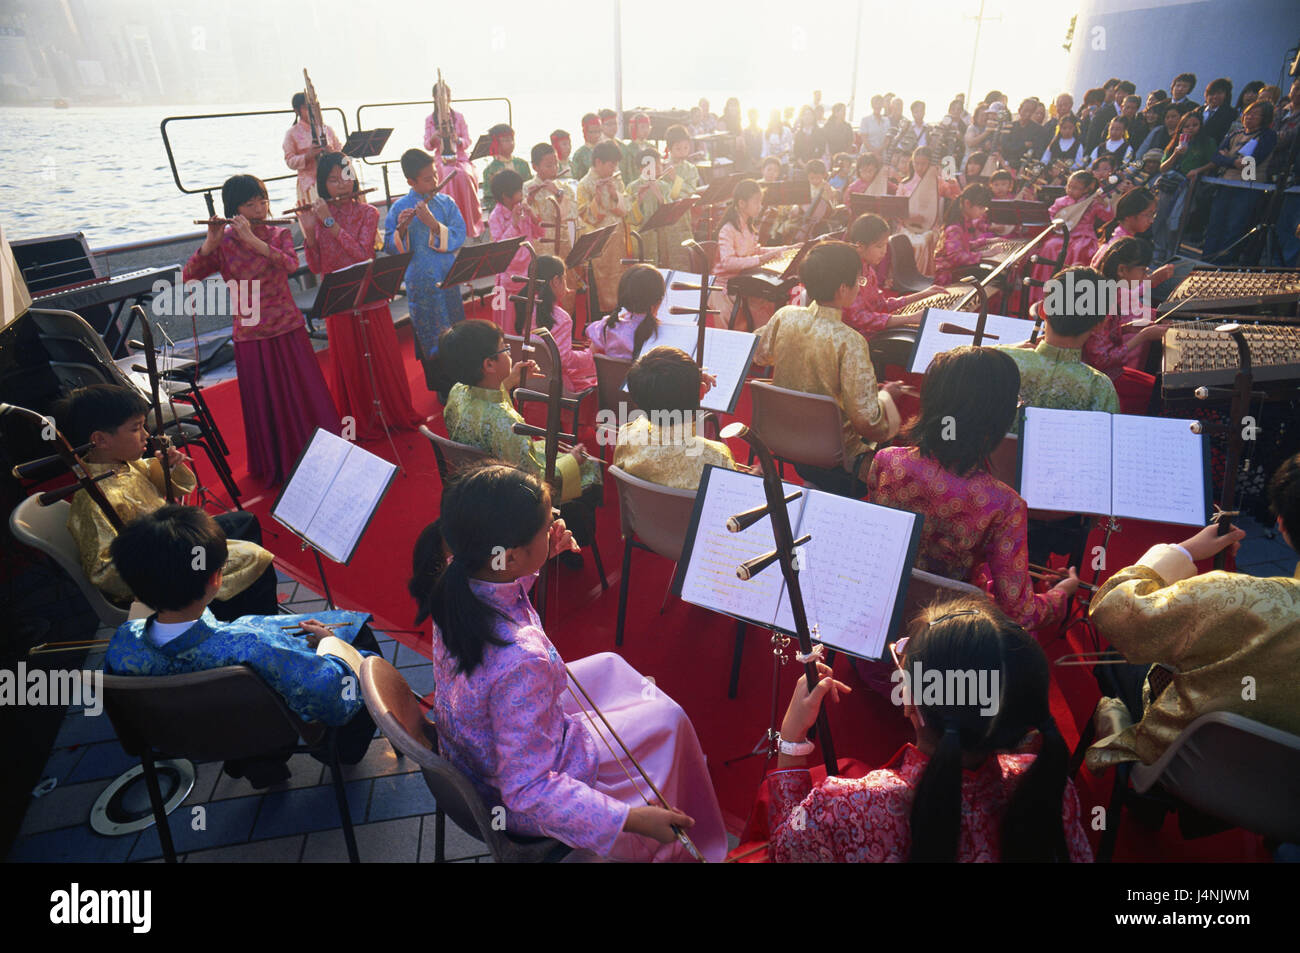 China, Hong Kong, Kowloon, orchestra, music, Asia, town, city, cosmopolitan city, metropolis, children, young persons, people, Asians, showing, performance, make music, musical instruments, traditionally, in Chinese, Stock Photo